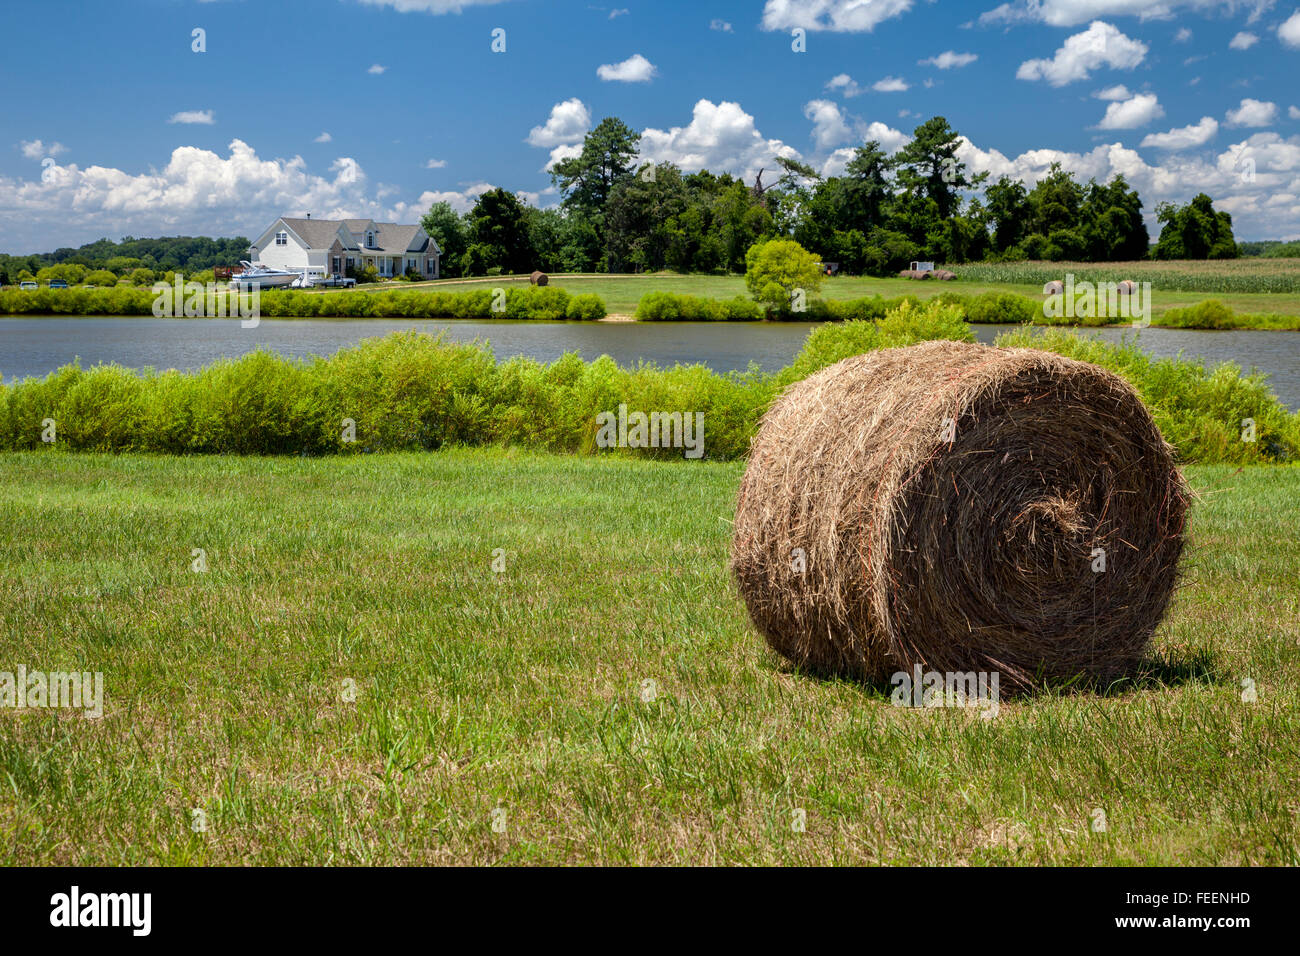 Leonardtown, Maryland, USA.  Farm, with Hay Bale in Pasture, Pond, Barns, Cornfield in Distance. Stock Photo